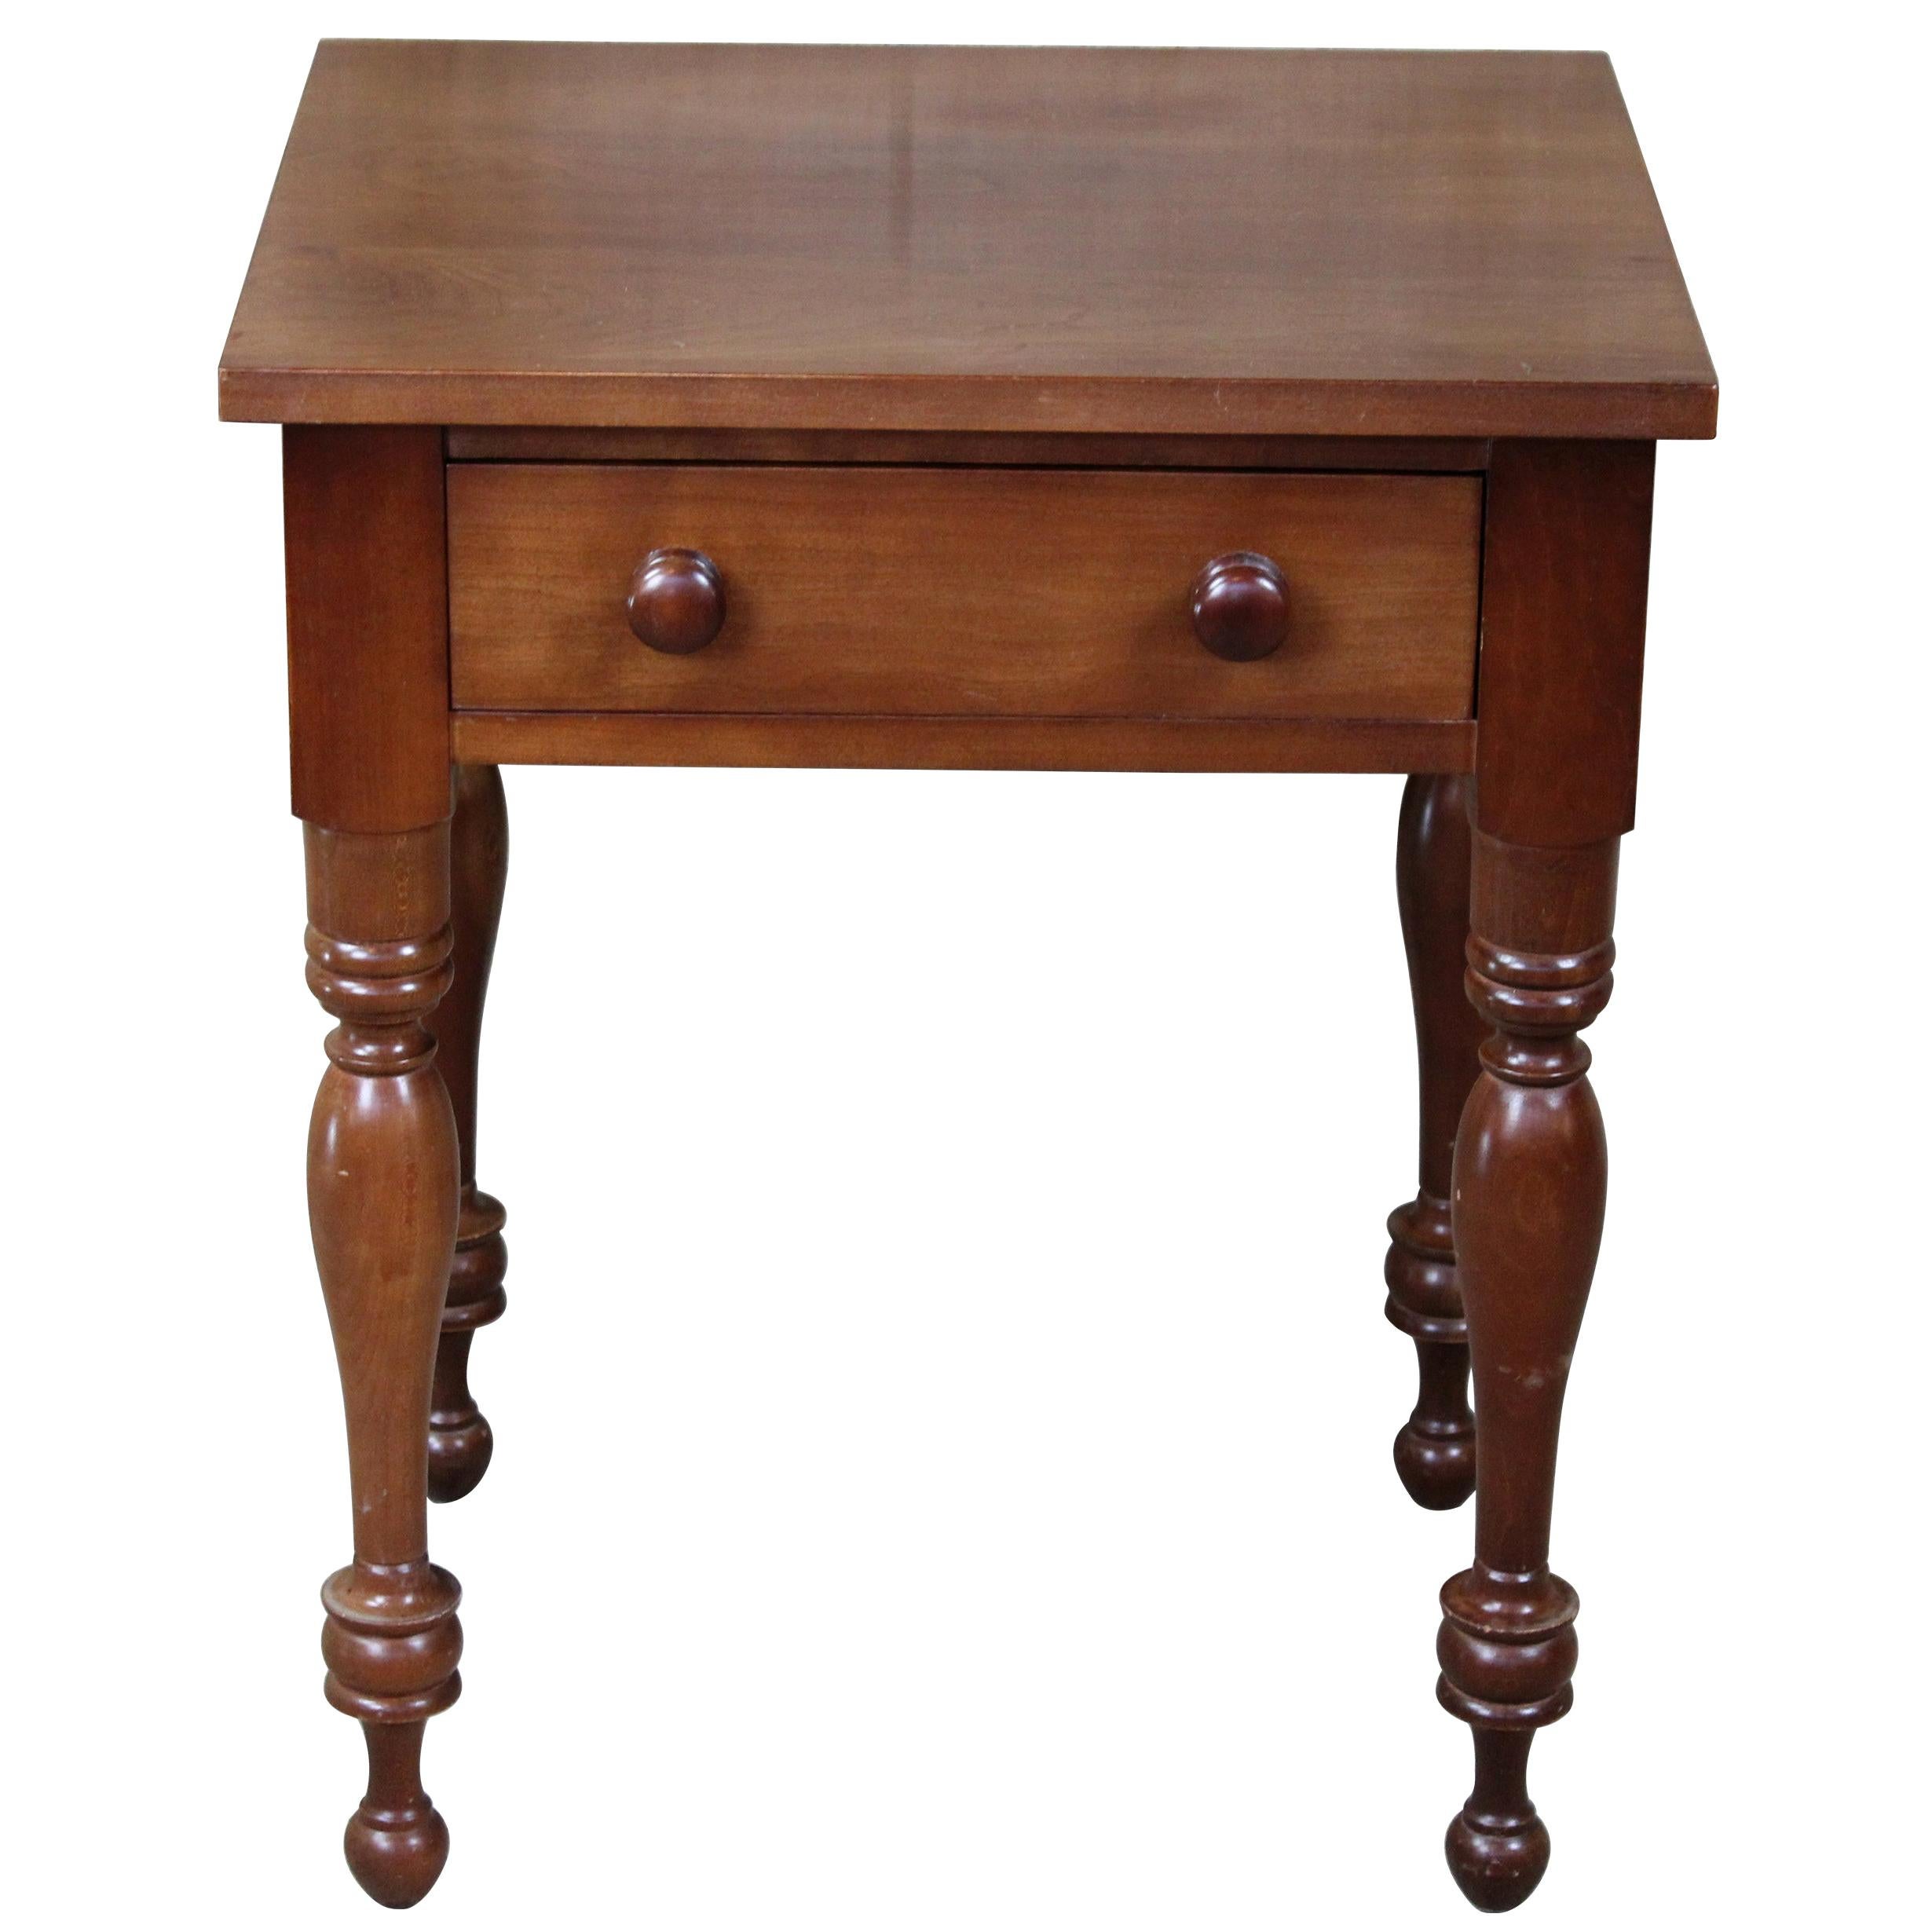 Cassady Furniture Early American Cherry Side End Accent Table Nightstand